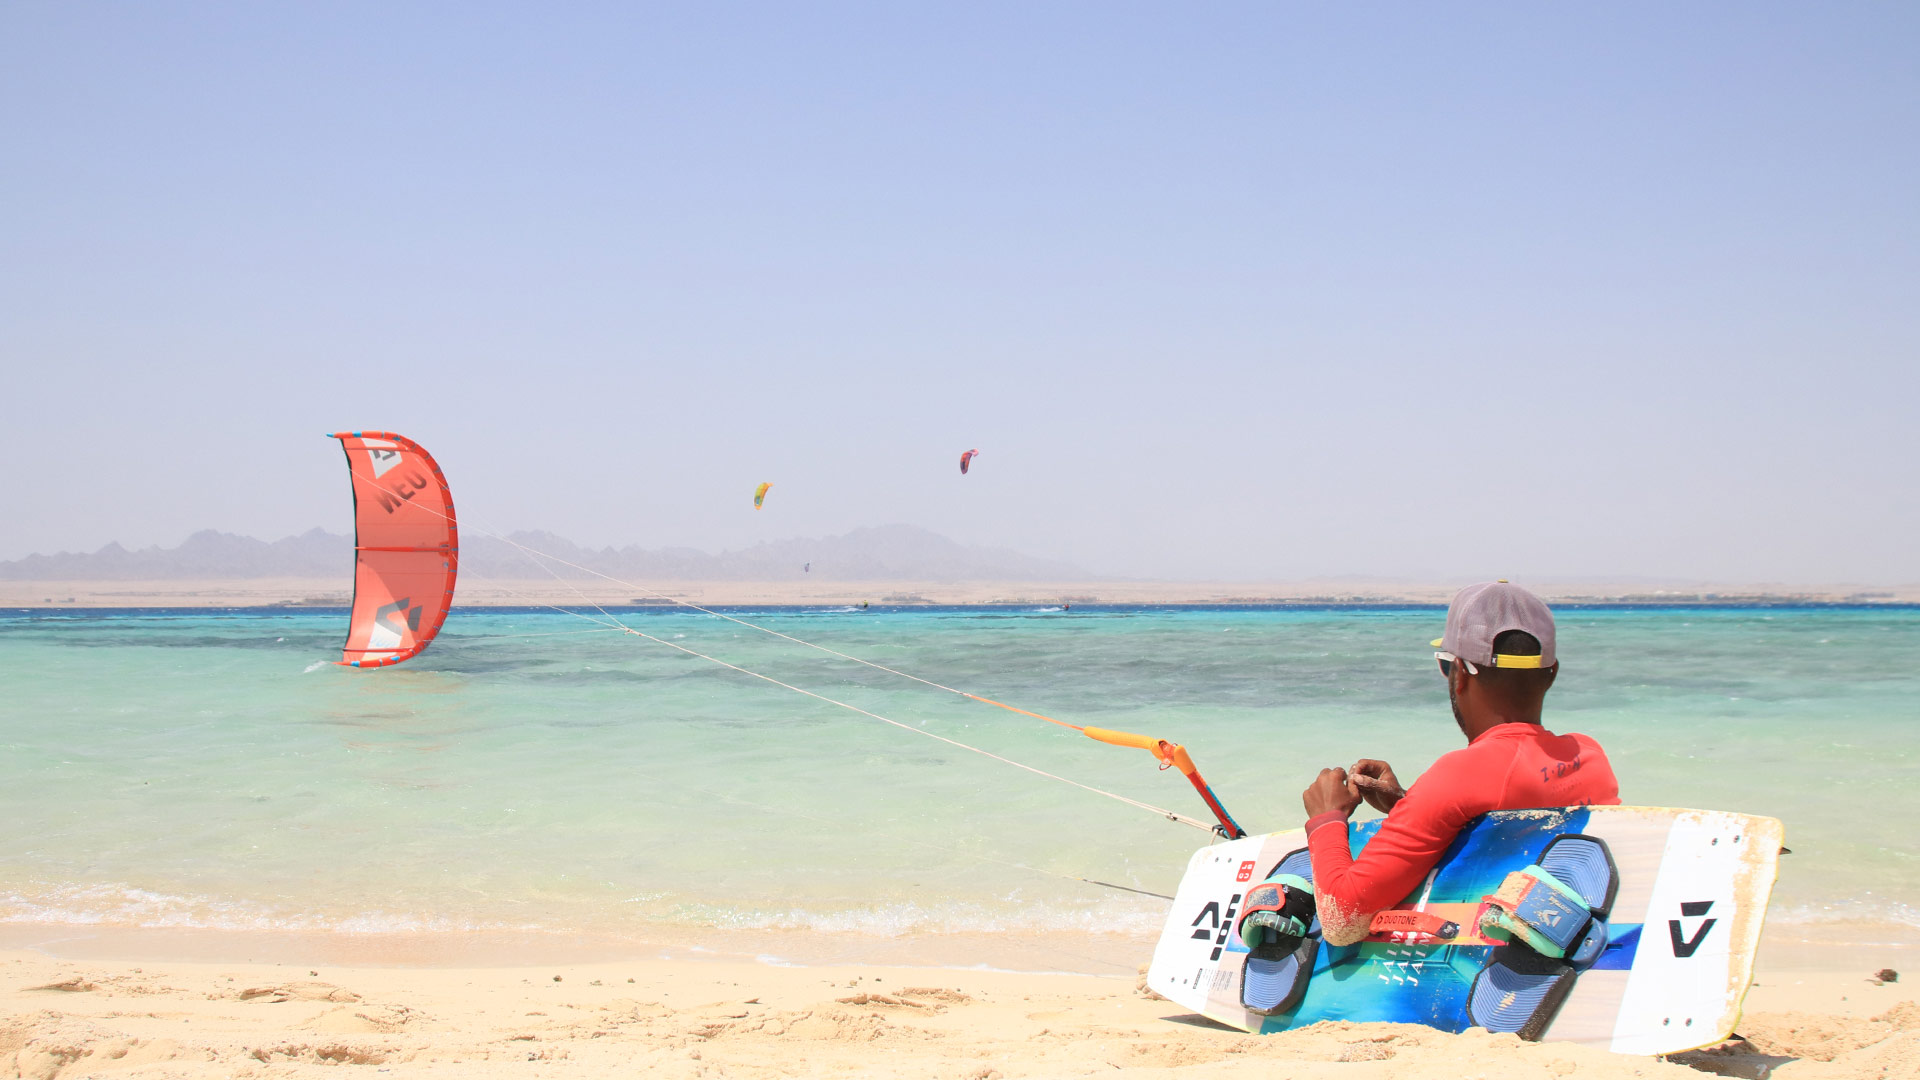 A kitesurfer, sitting on the sand leaning on his board waiting for the wind to lift his kite. sitt